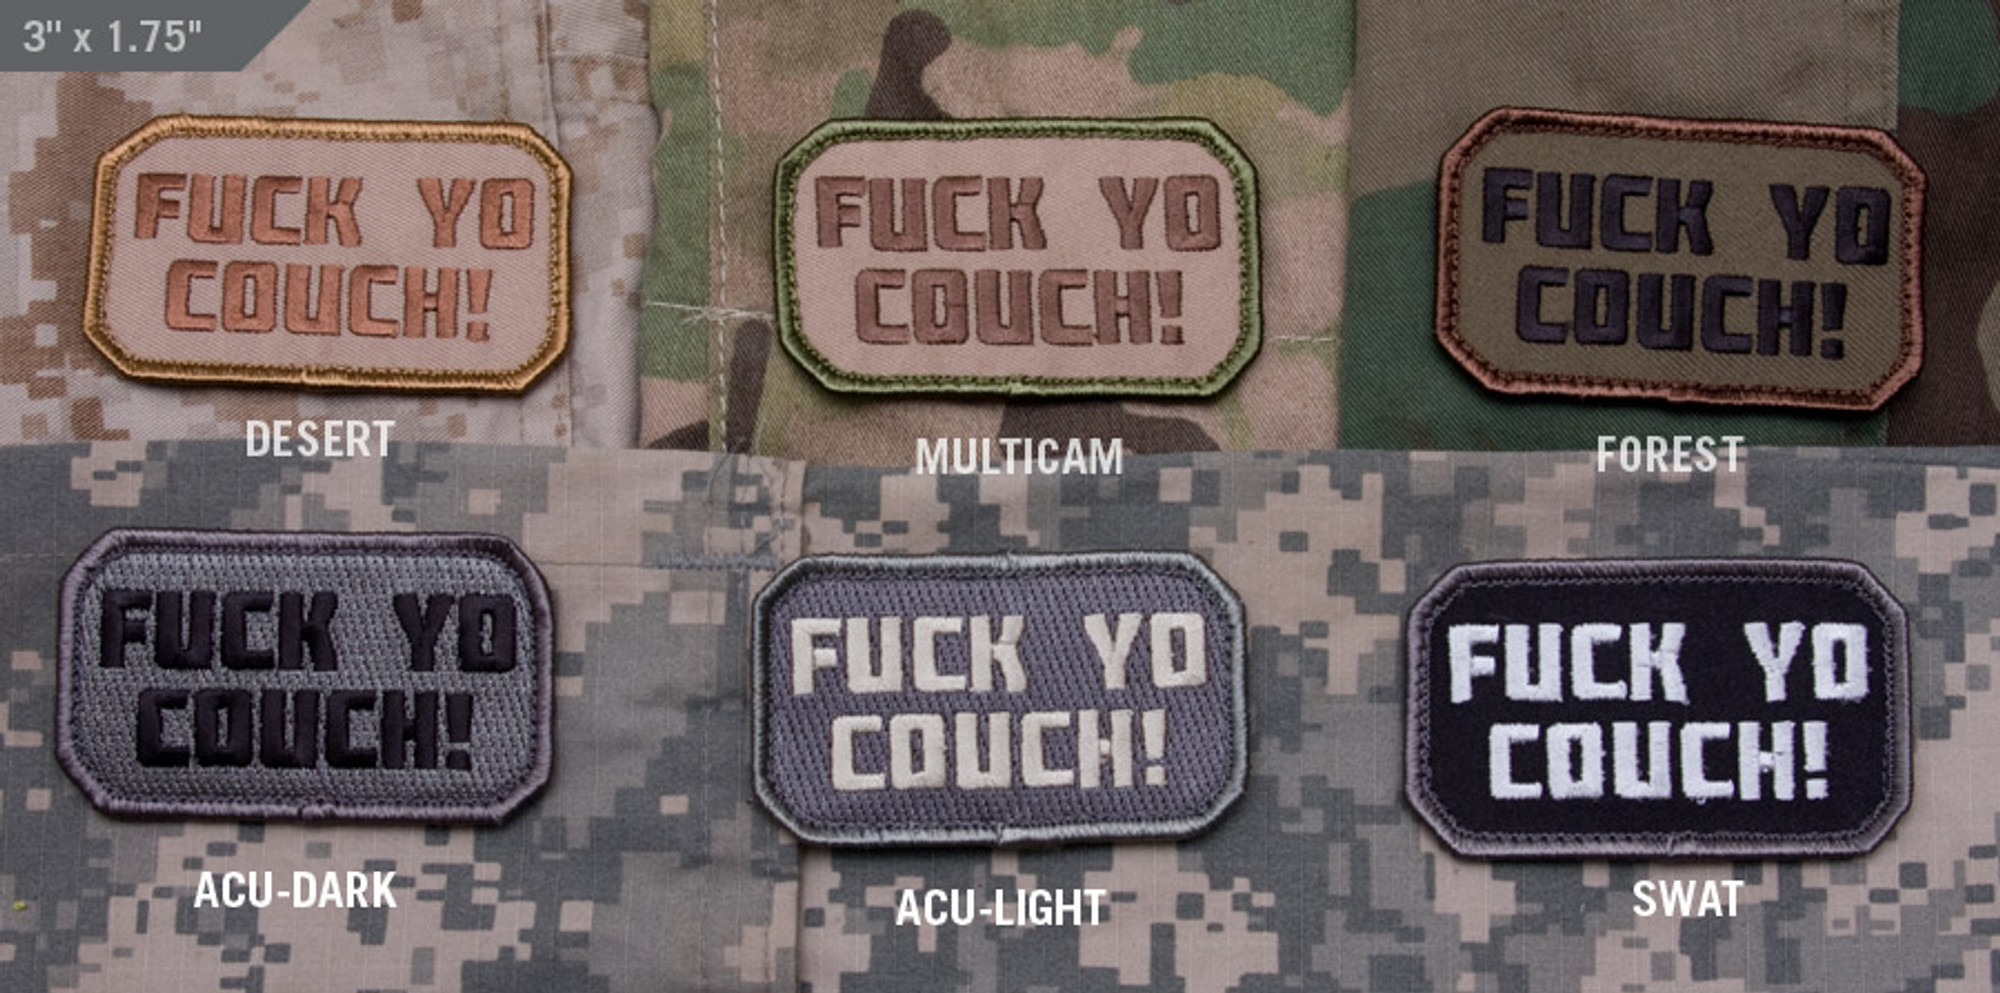 F Yo Couch - Morale Patch